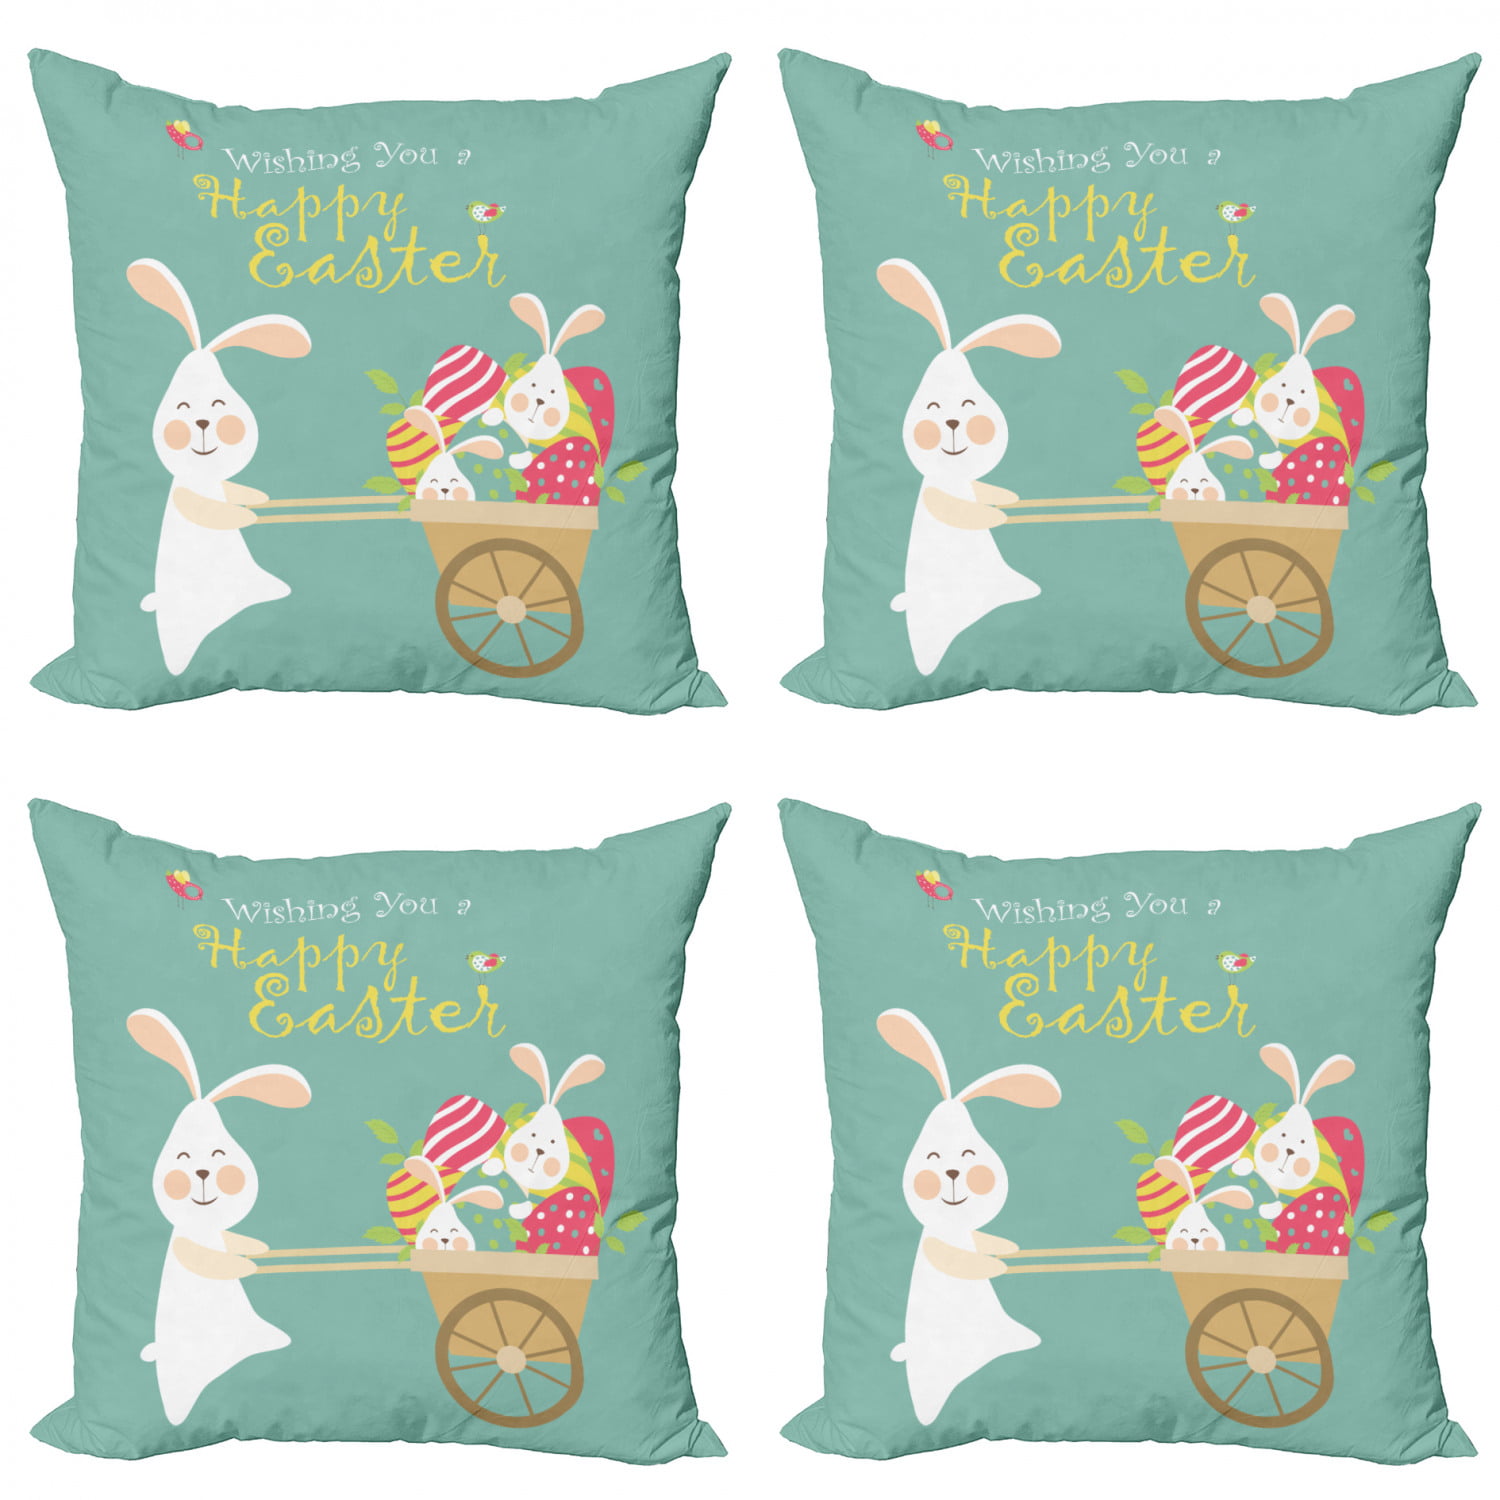 All Smiles Easter Decor Throw Pillow Covers Rabbit Bunnies with Eggs Outdoor Decorations Set of 4 Purple Flowers Spring Decorative Themed Cushion Covers 18x18